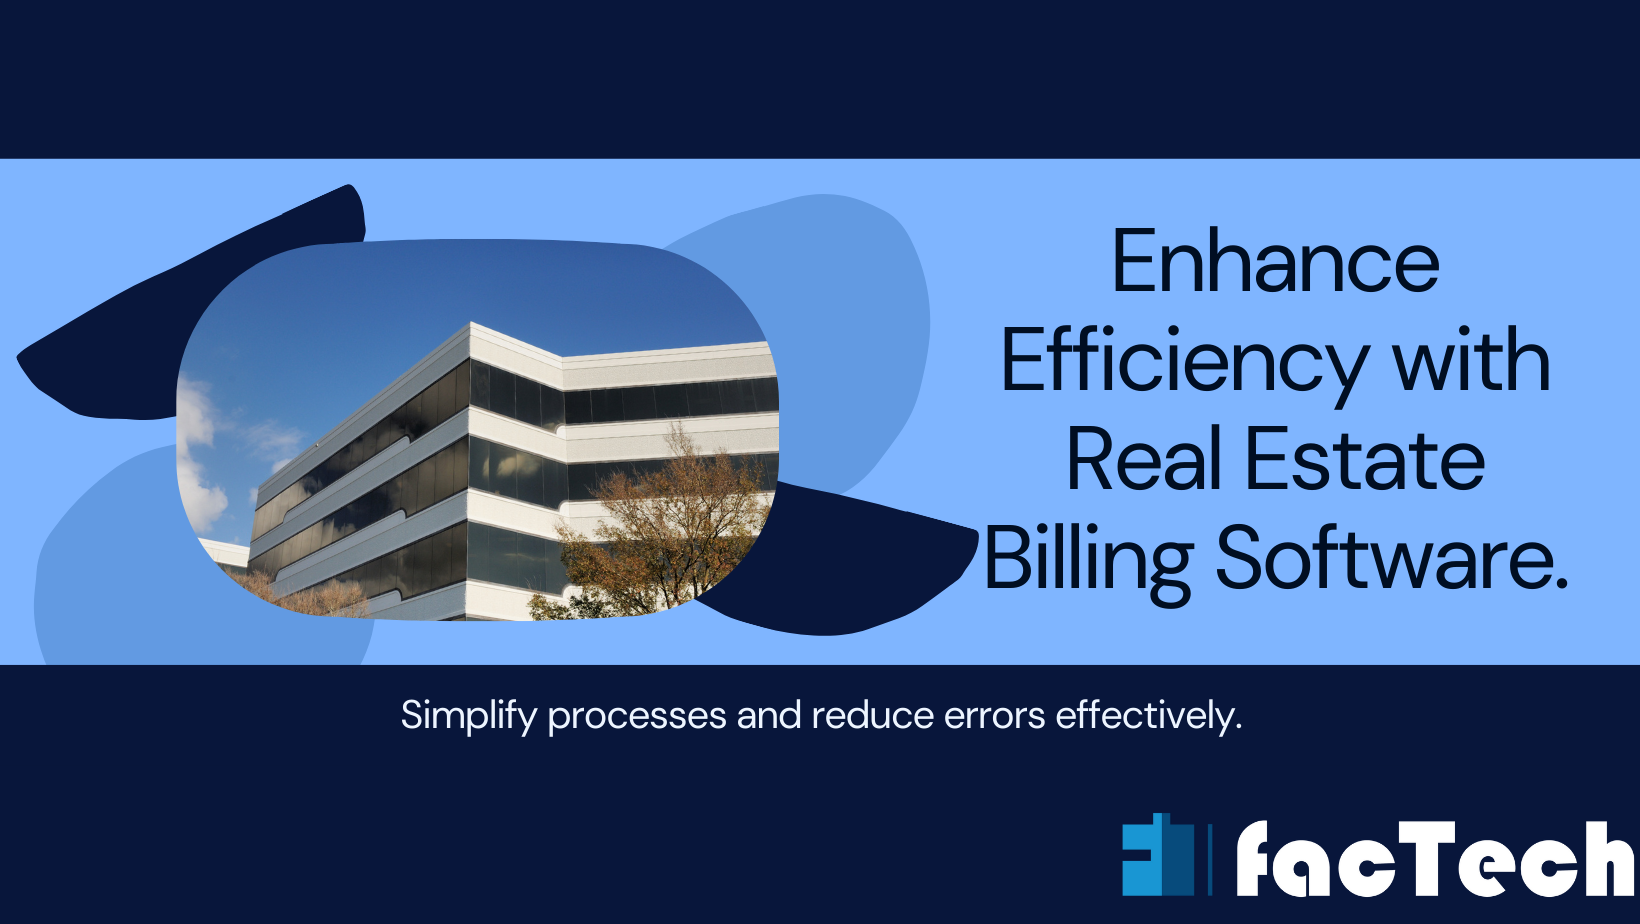 Enhance Efficiency with Real Estate Billing Software.